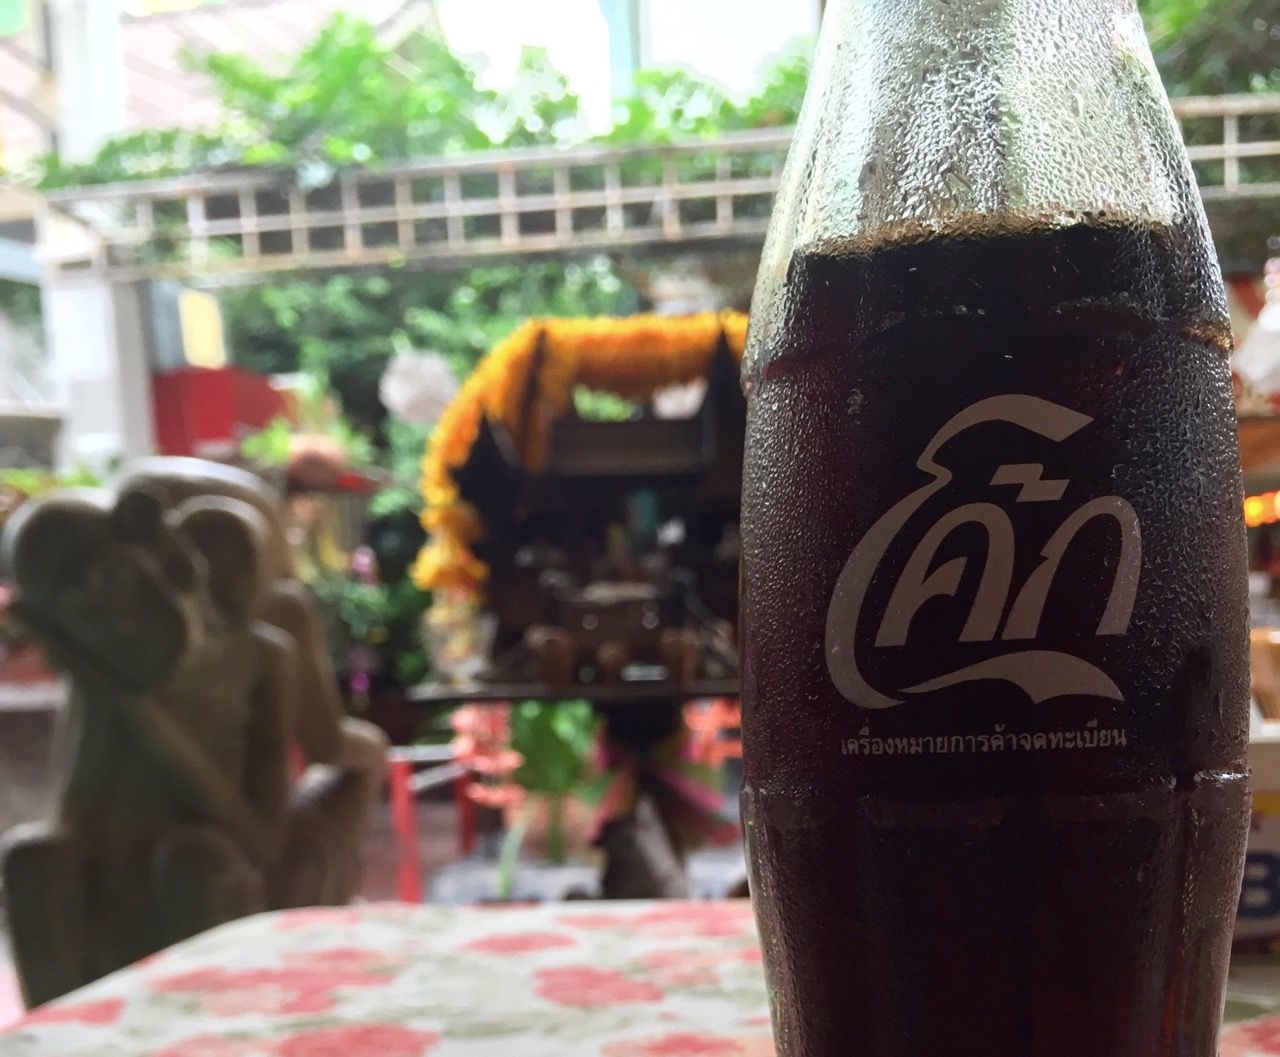 A bottle of Coca-Cola with a thai label.